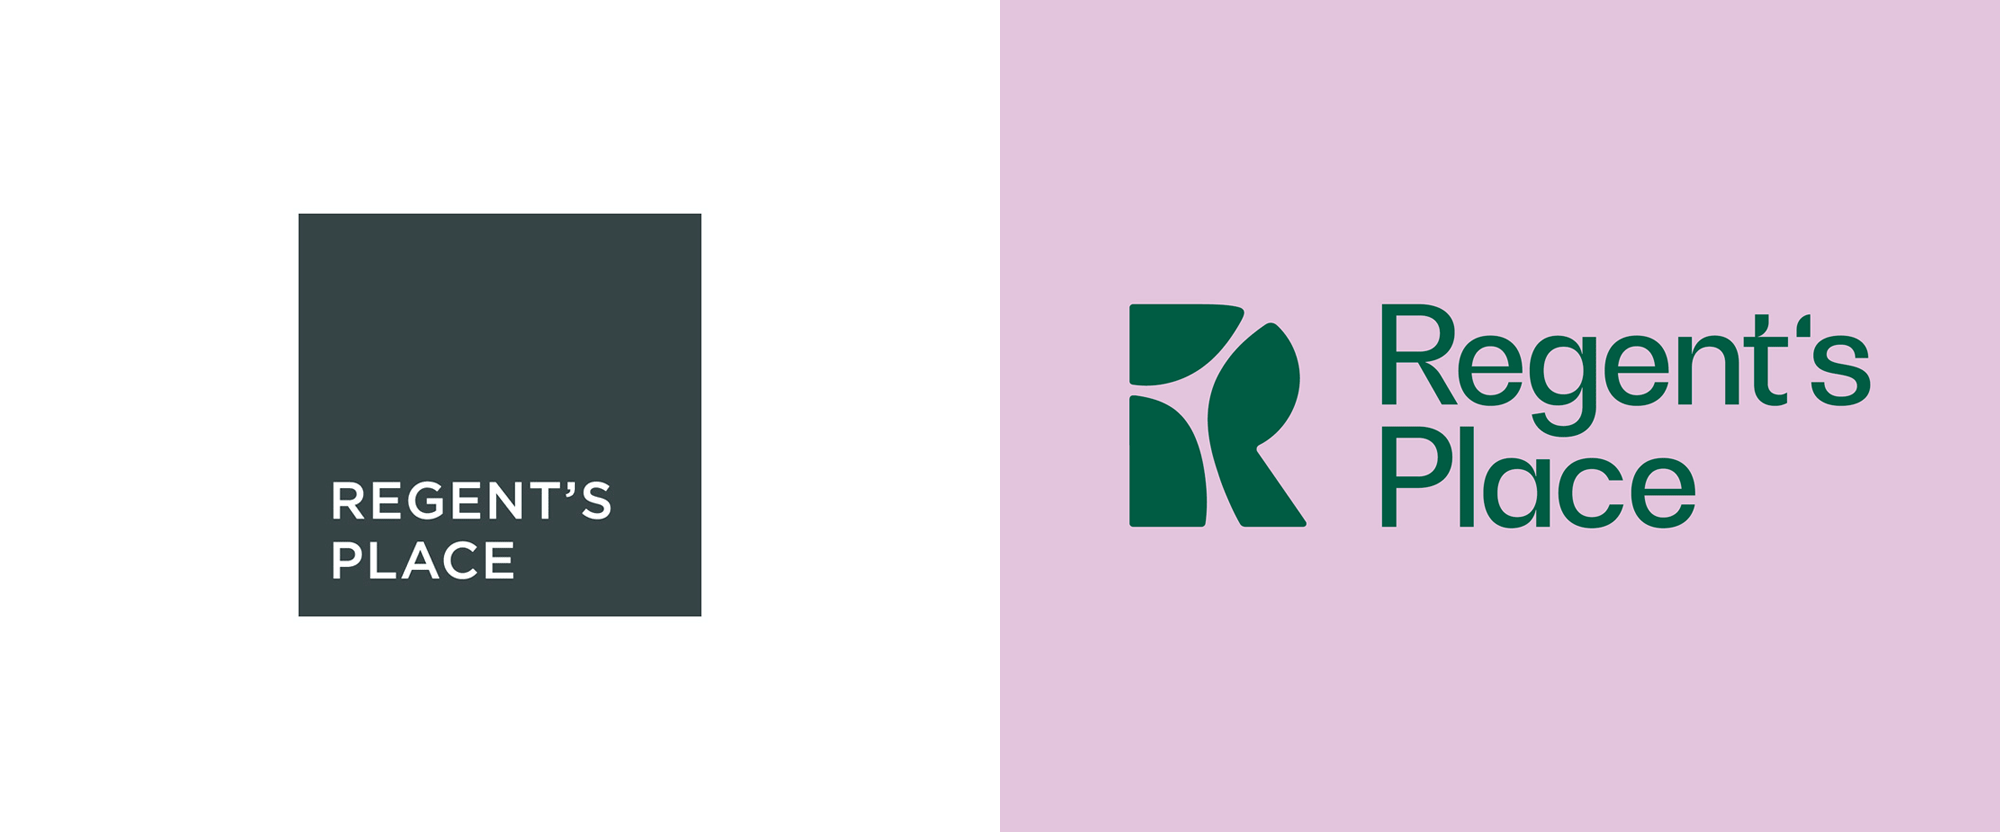 New Logo and Identity for Regent’s Place by DixonBaxi